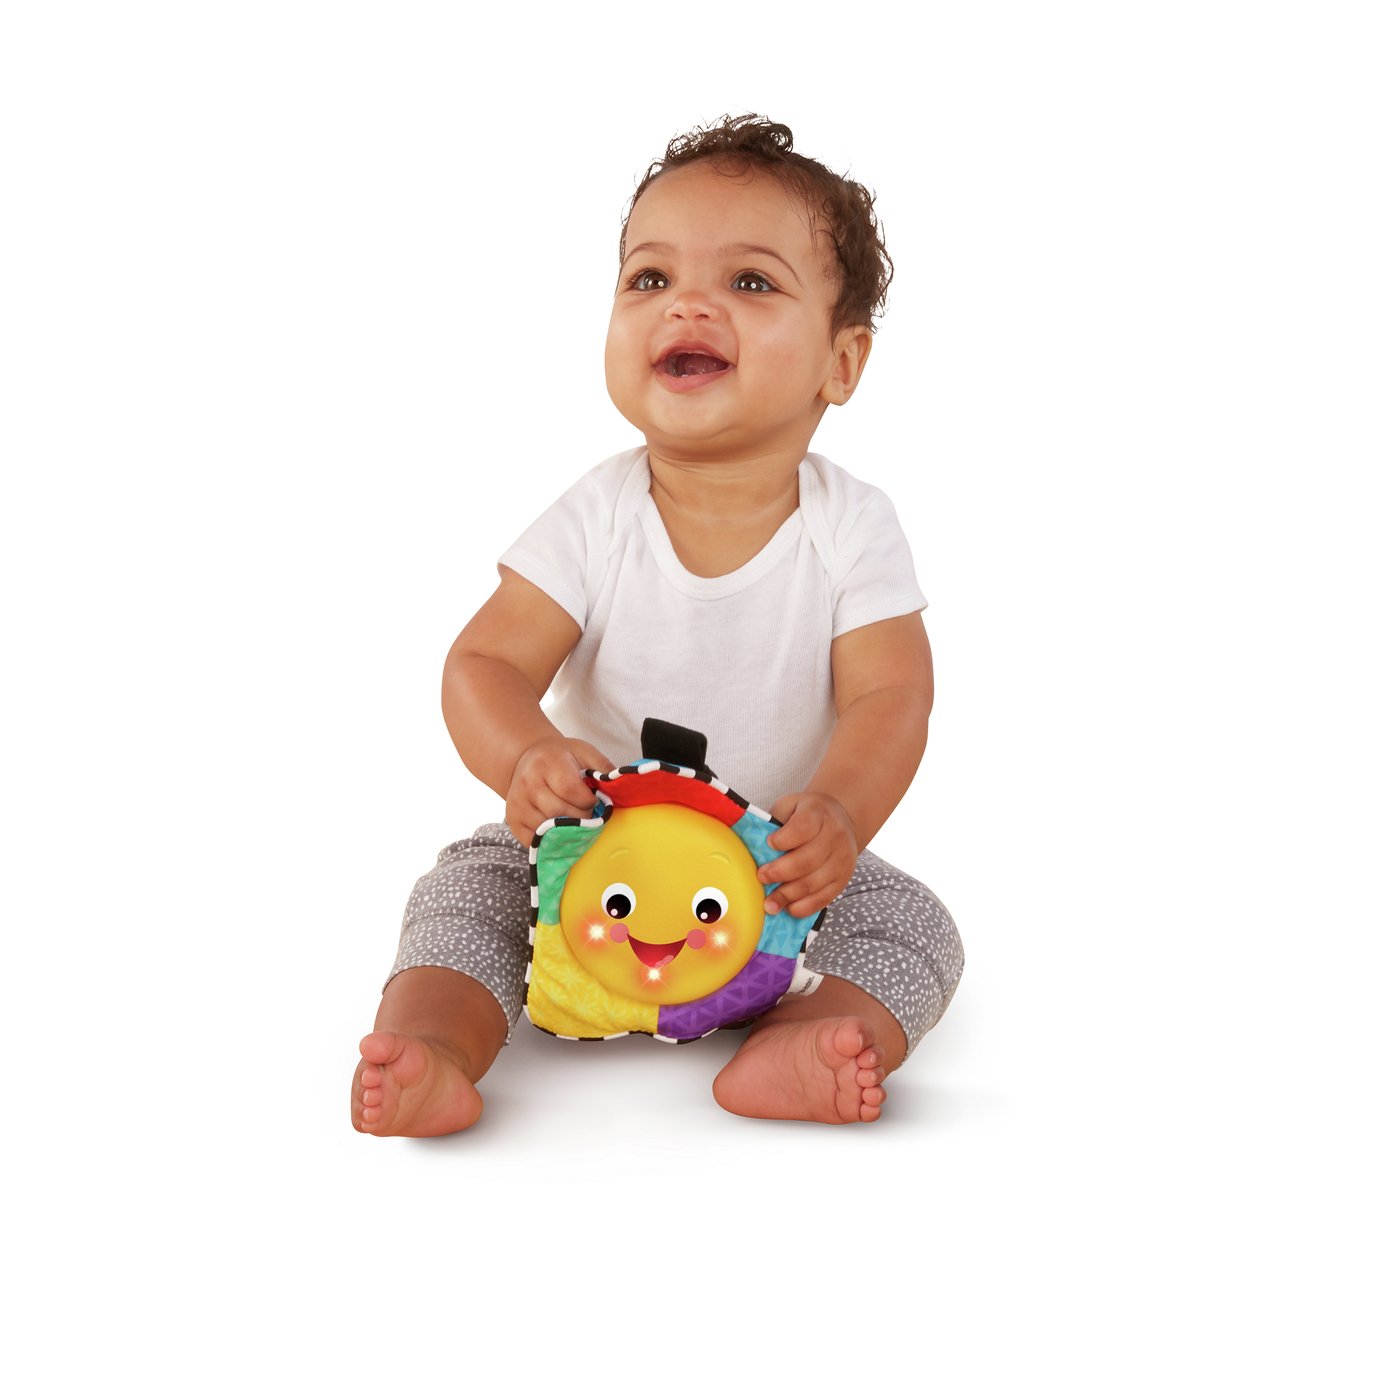 Baby Einstein Star Bright Melodies Take Along Toy Review